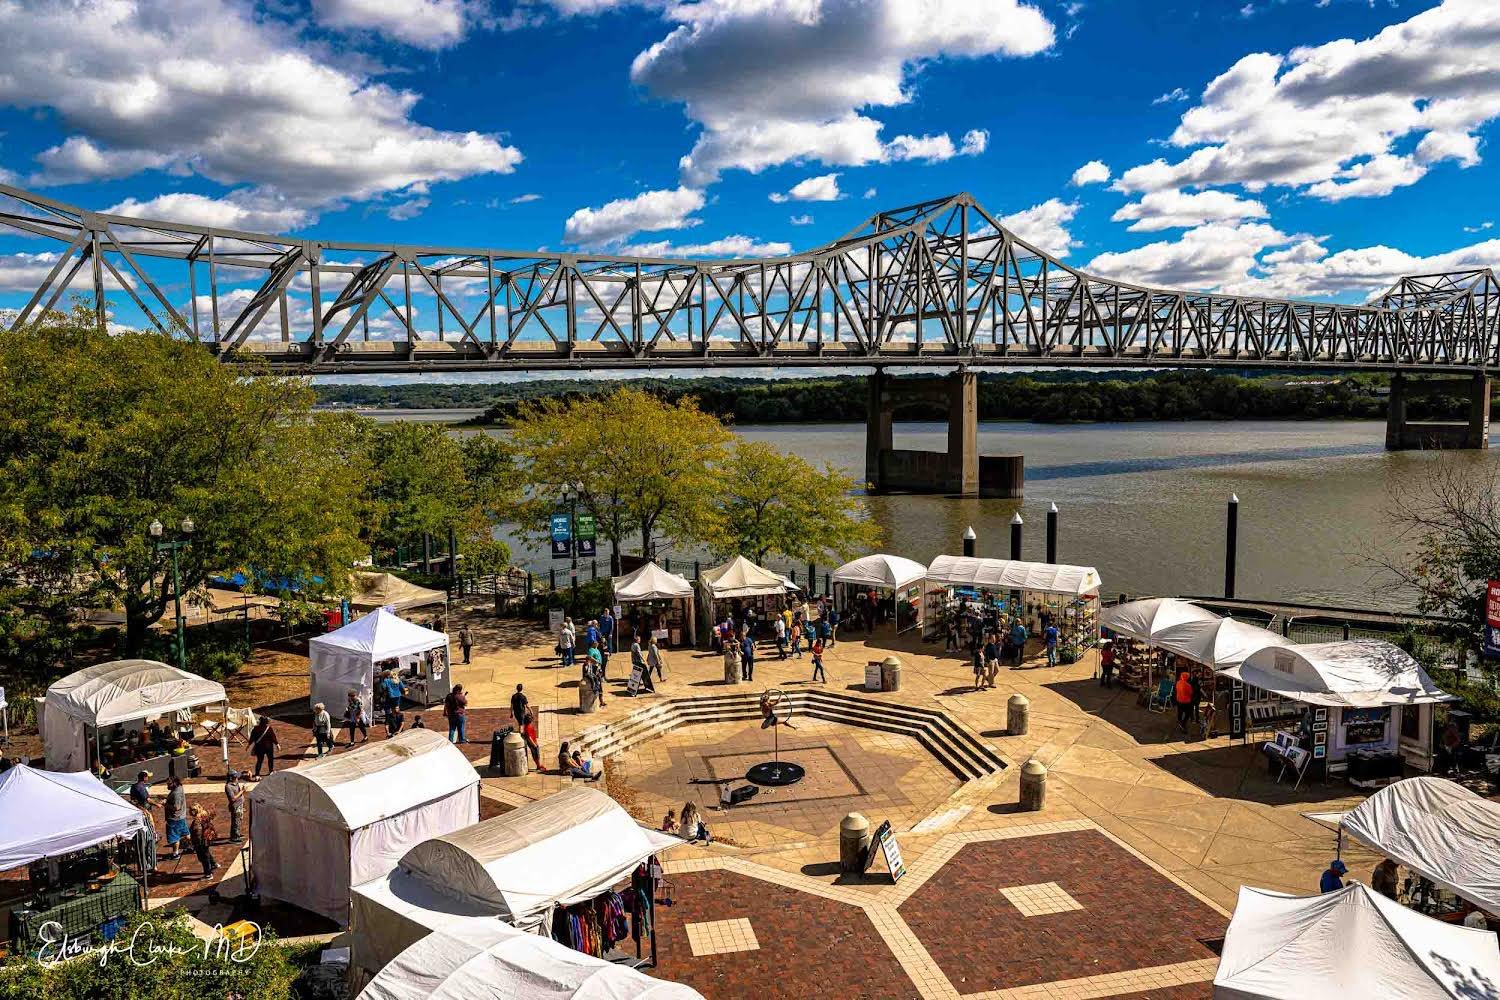 Fridays at the Front' return to Louisville's Waterfront Park next week